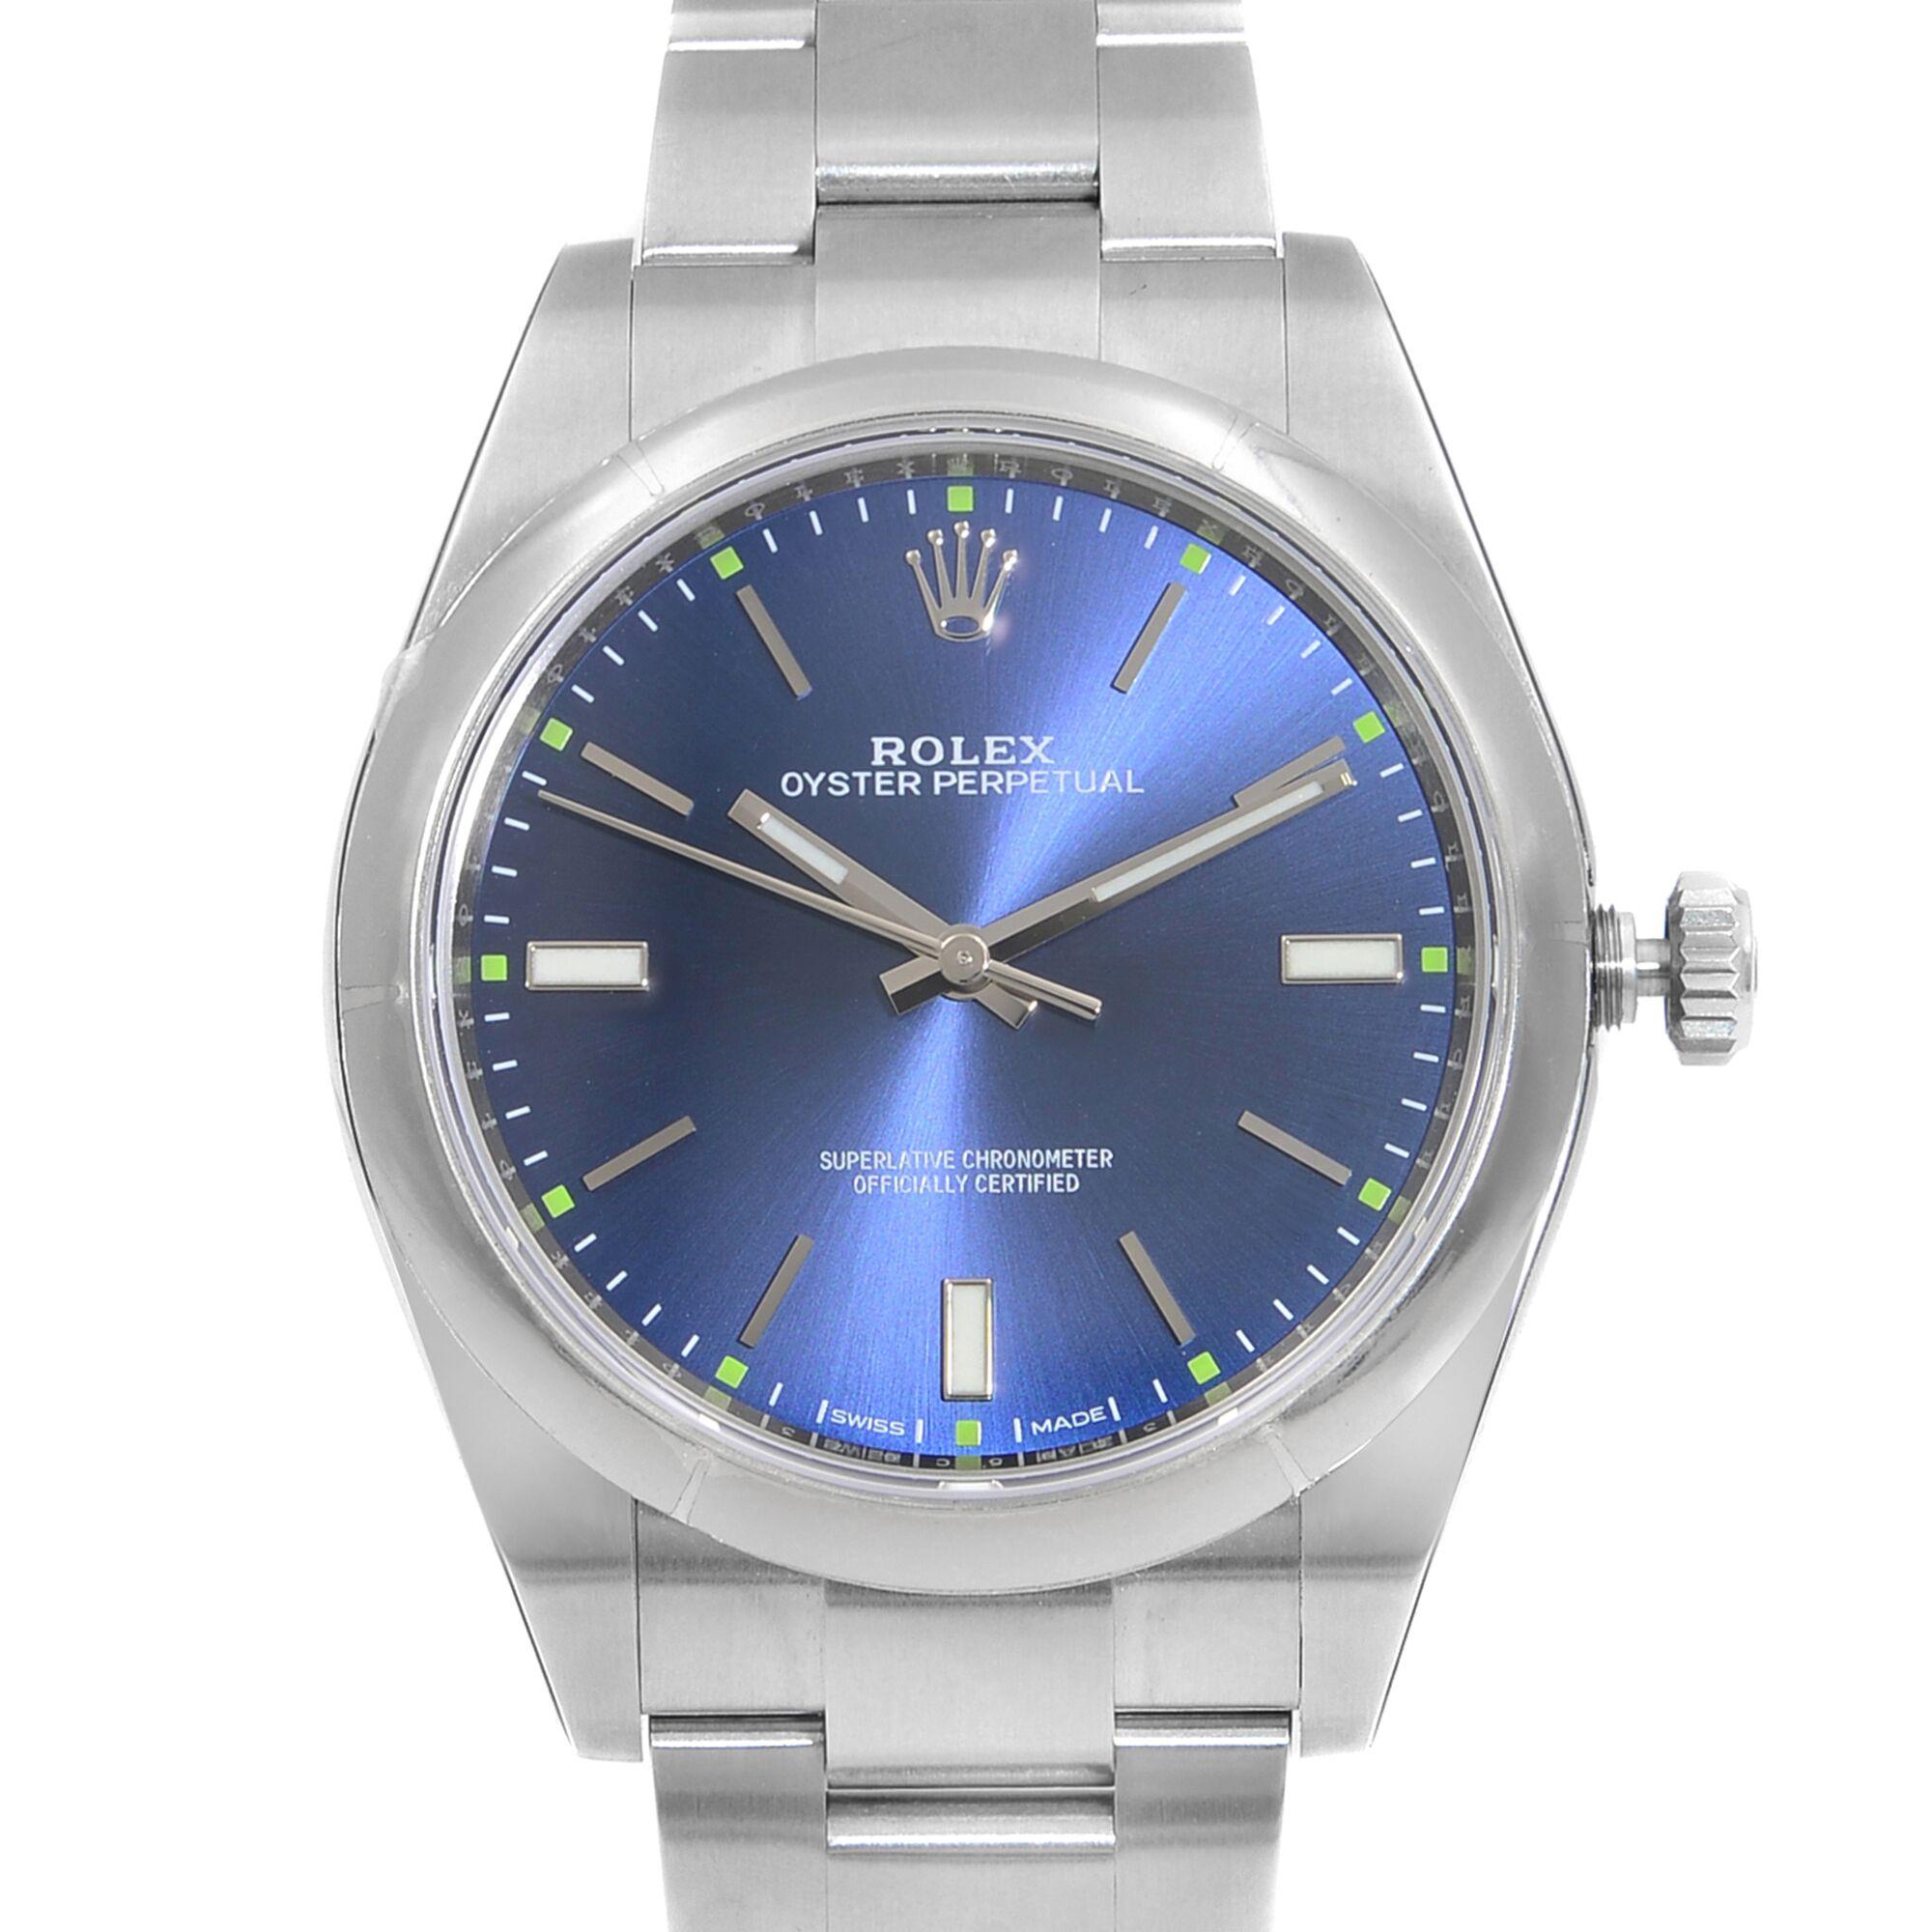 Pre-Owned Like New 2019 Card.  Rolex Oyster Perpetual 39 Steel Blue Dial Automatic Men's Watch. This Beautiful Timepiece Features: Stainless Steel Case and Rolex Oyster Bracelet, Fixed Domed Stainless Steel Bezel, Blue Dial with Luminous Silver-Tone